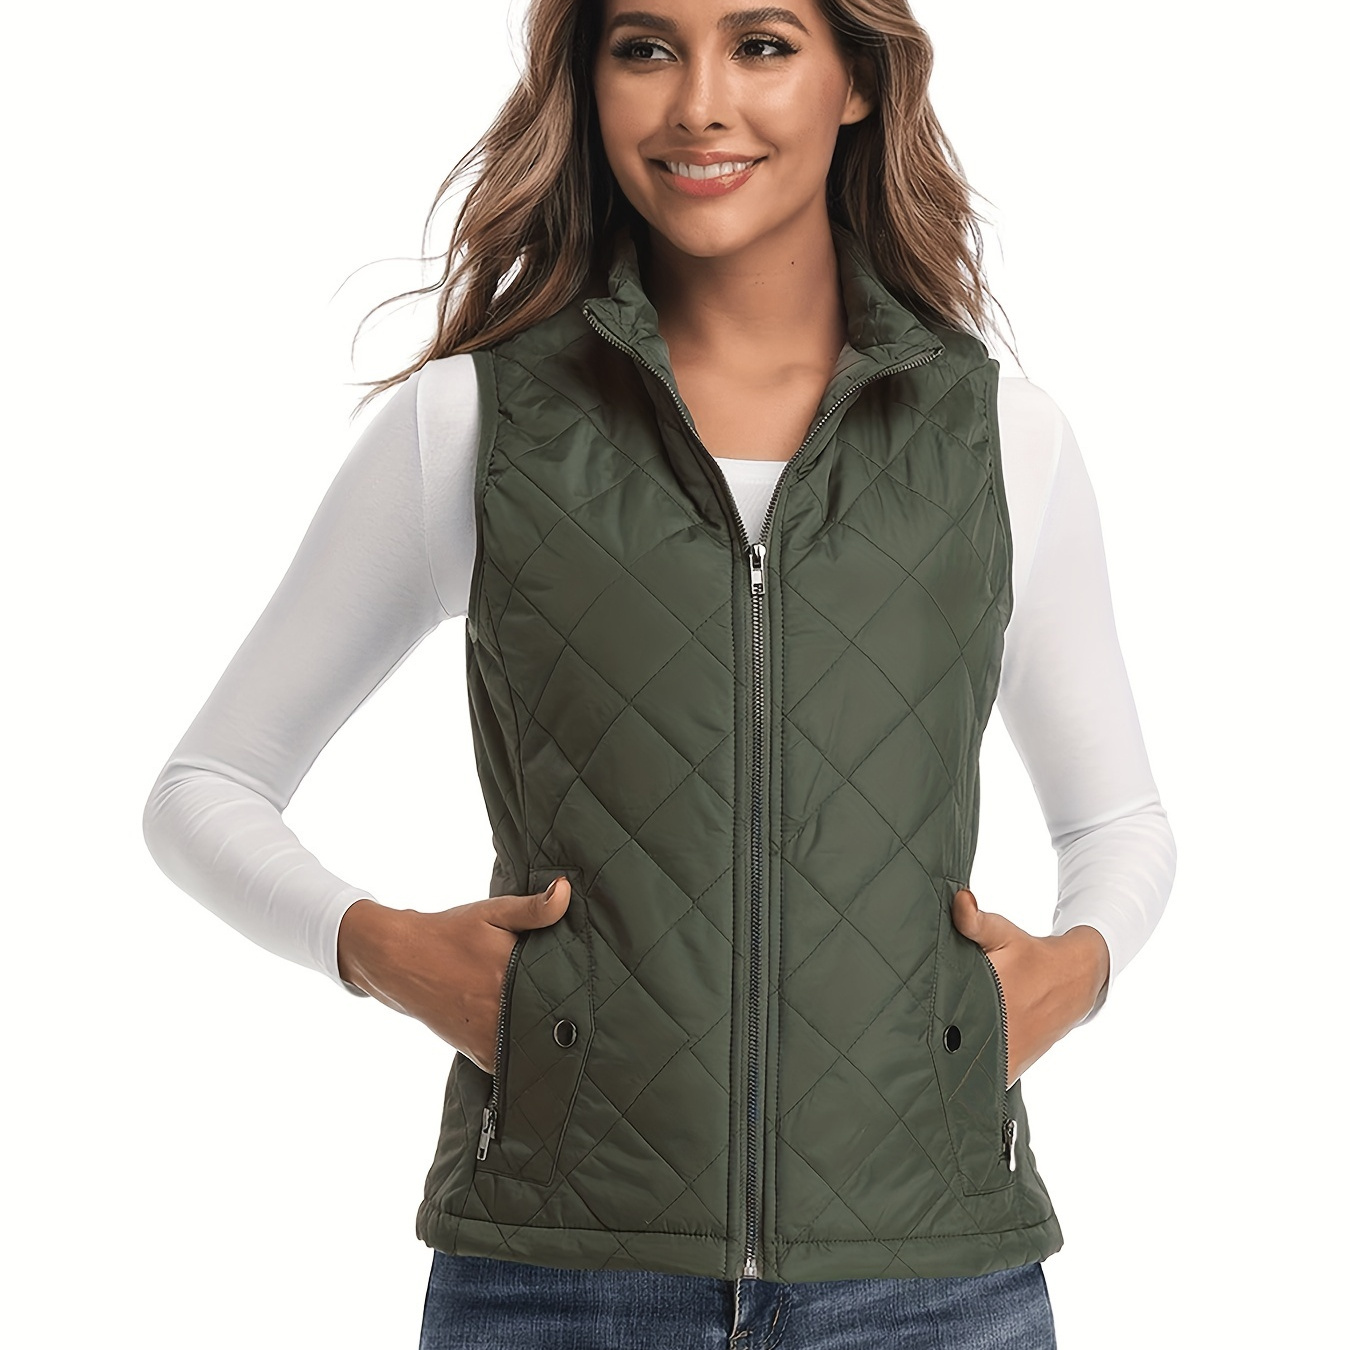 

Longking Women's Vests - Padded Lightweight Vest For Women, Stand Collar Quilted Gilet With Zip Pockets